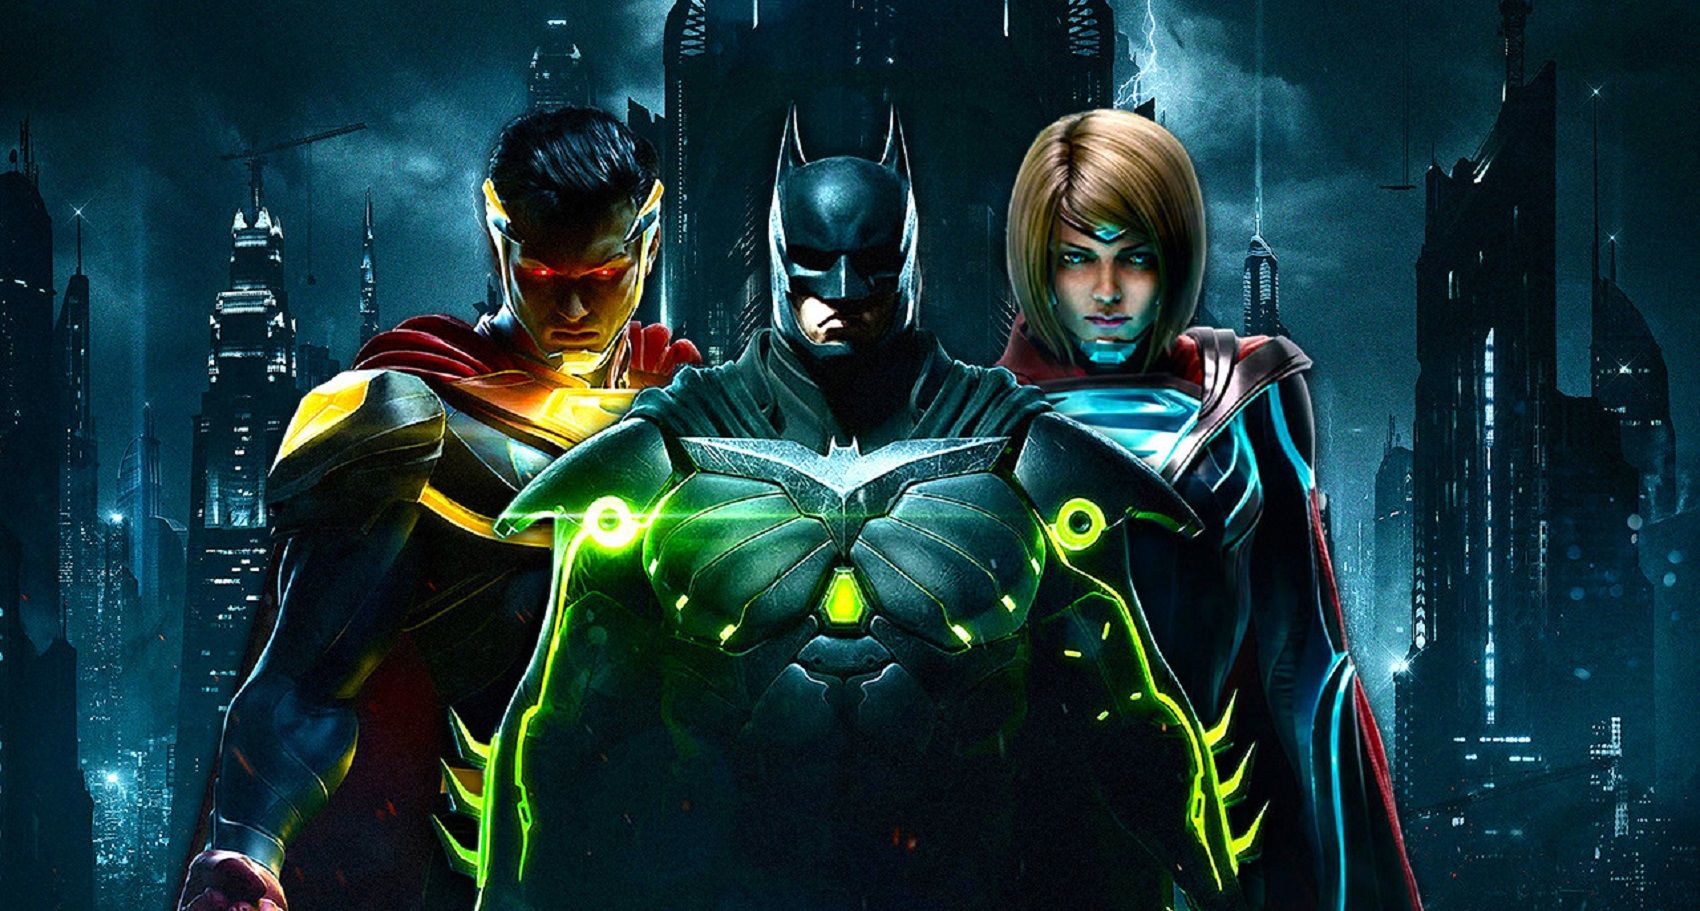 10 Greatest DC Video Games, According To Metacritic